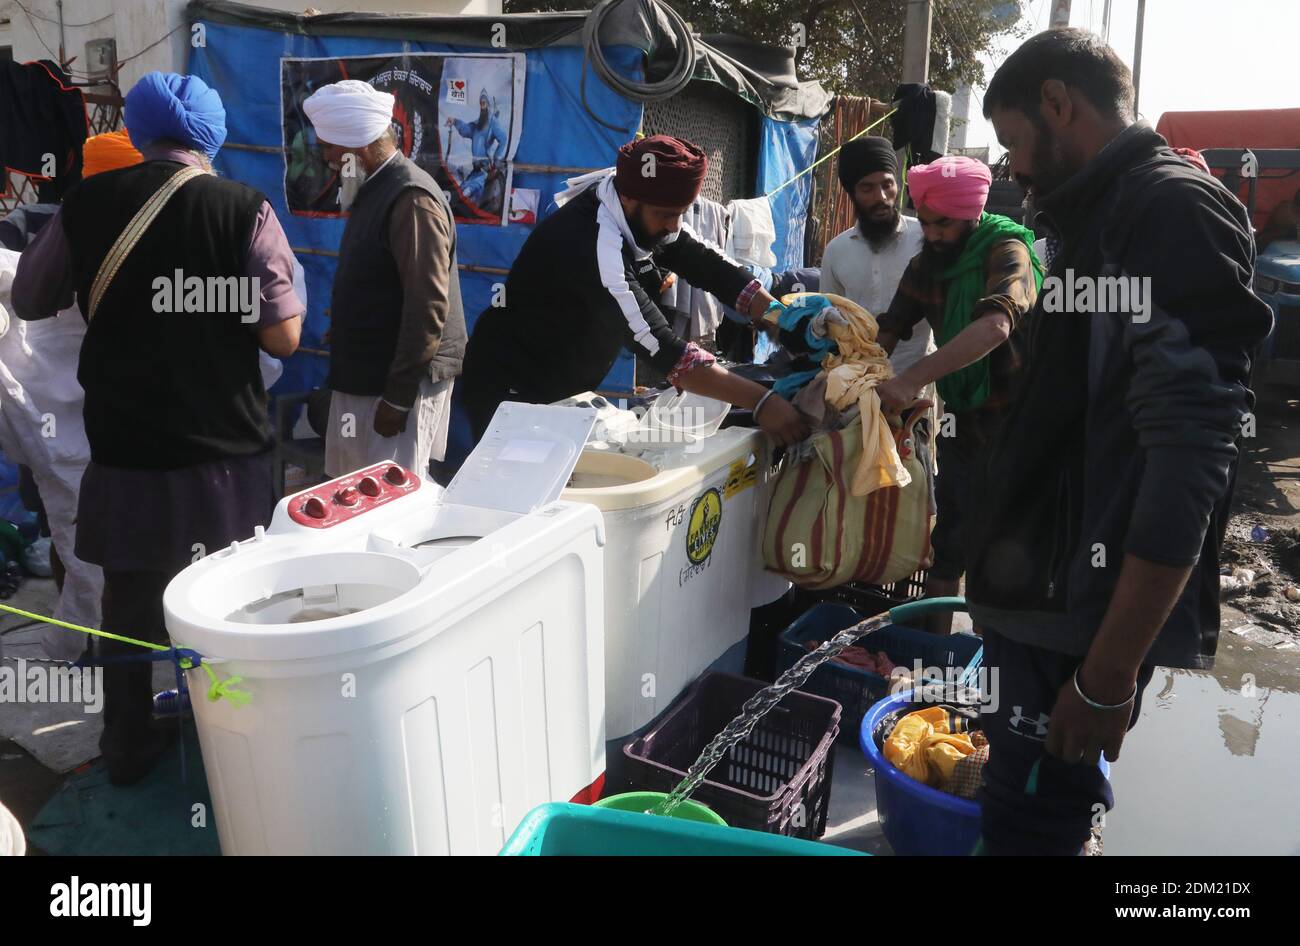 Protesters washing clothes during the demonstration.Thousands of Farmers protest for 21days on different borders linked to New Delhi demanding the rollback of 3 government agricultural reforms bill. Stock Photo